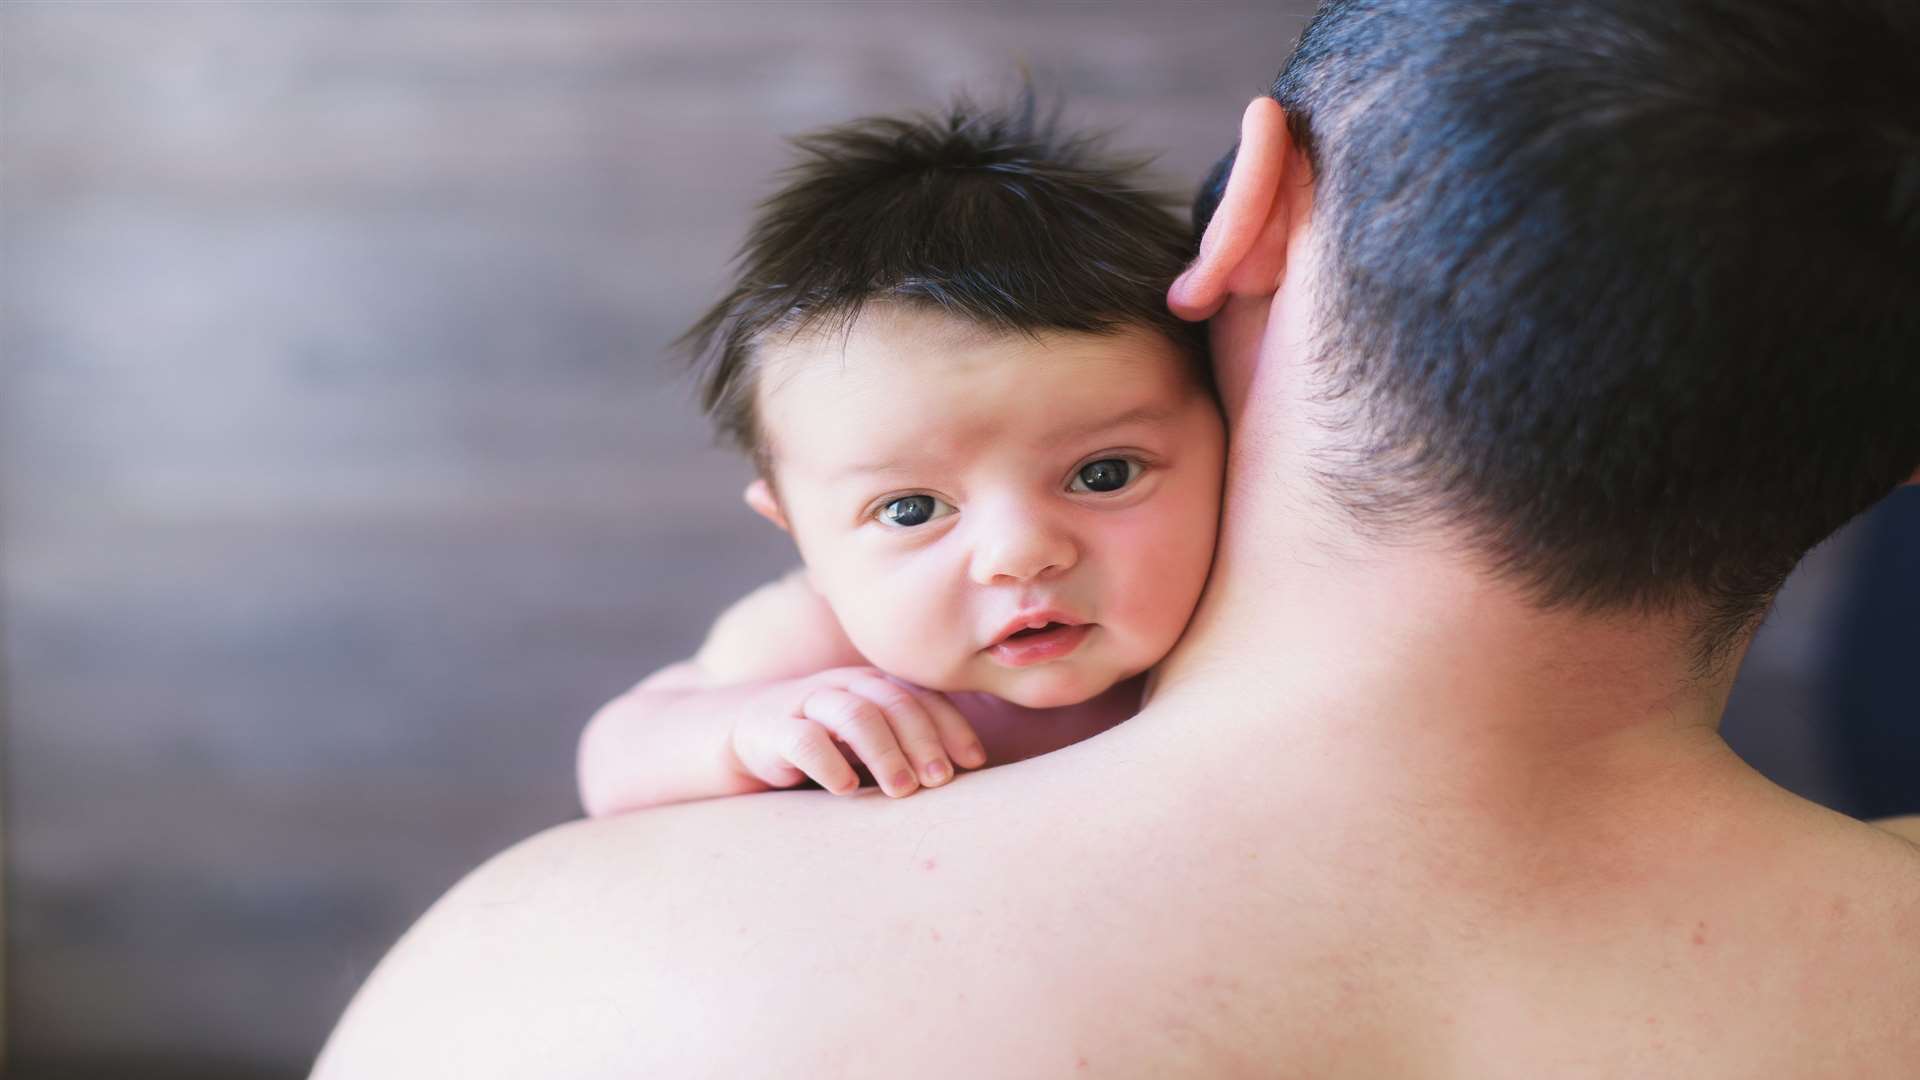 'Fathers who did skin to skin felt consolidated in their parental role'